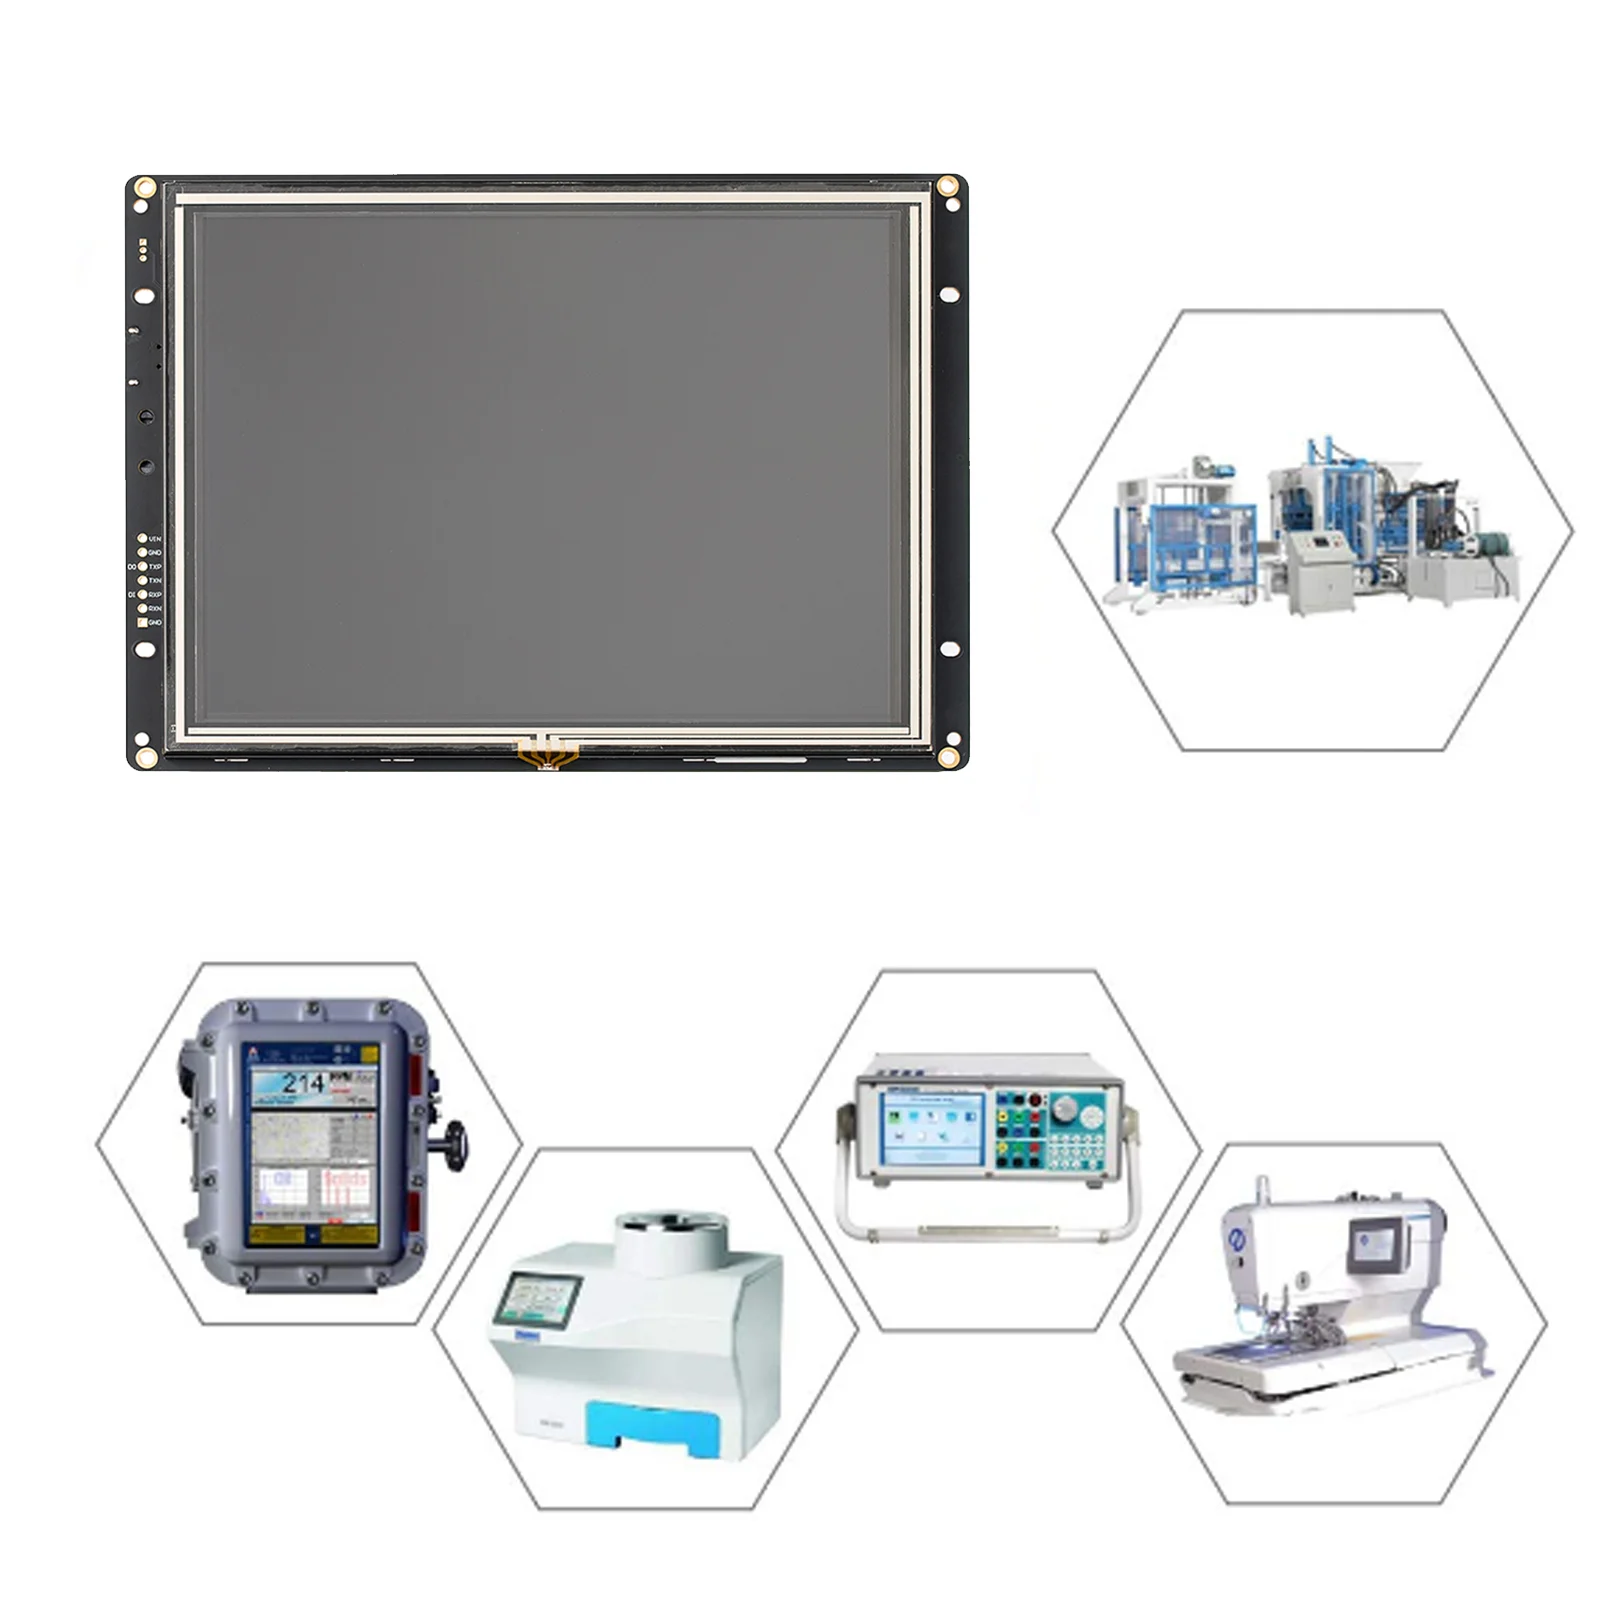 8 inch intelligent TFT-LCD module, 8 inch LCD display high resolution